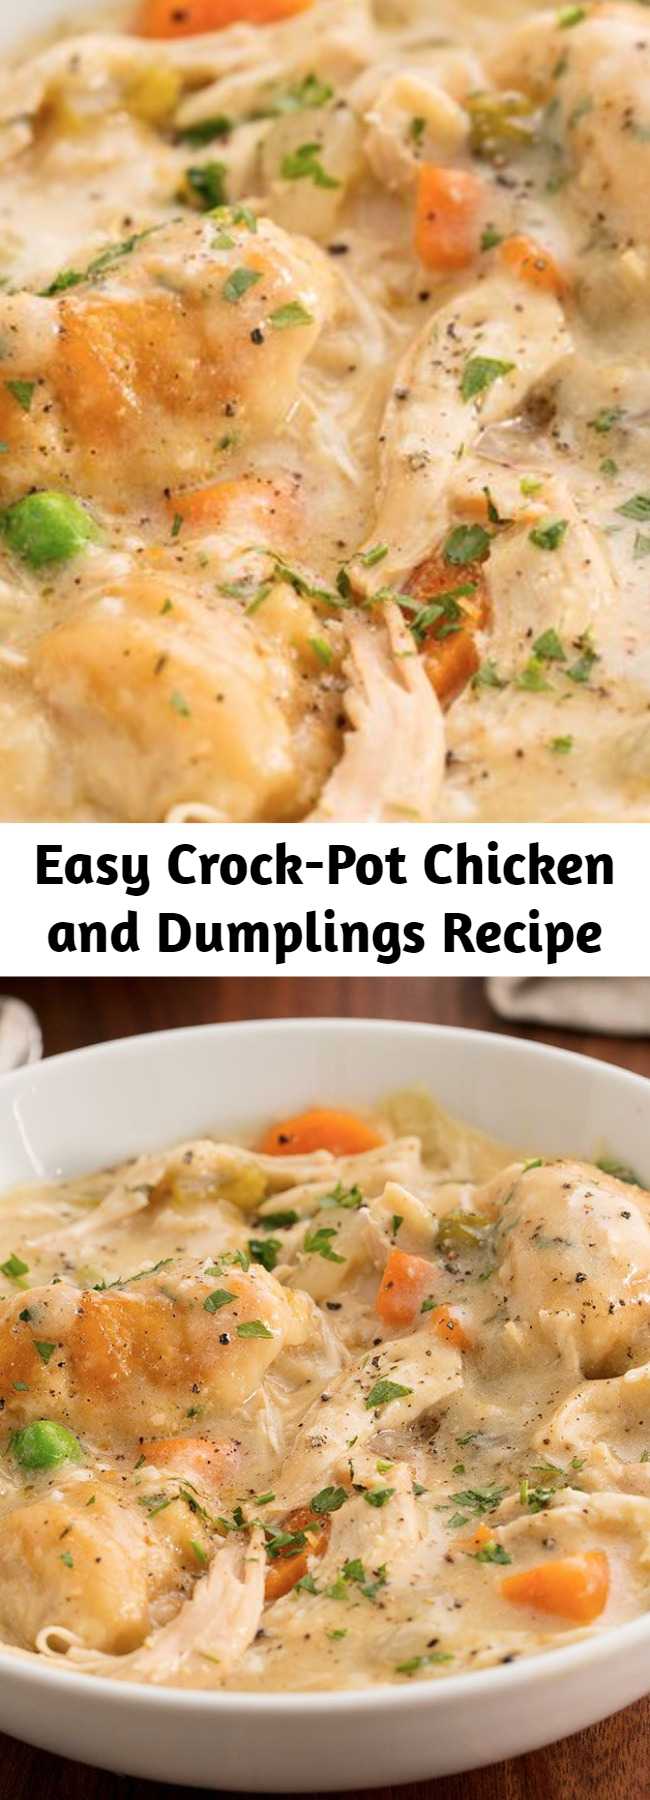 Easy Crock-Pot Chicken and Dumplings Recipe - This classic, comforting chicken and dumpling soup is almost too easy to make. #easy #recipe #slowcooker #crockpot #homemade #biscuits #dumpling #chicken #chickendumplings #biscuit